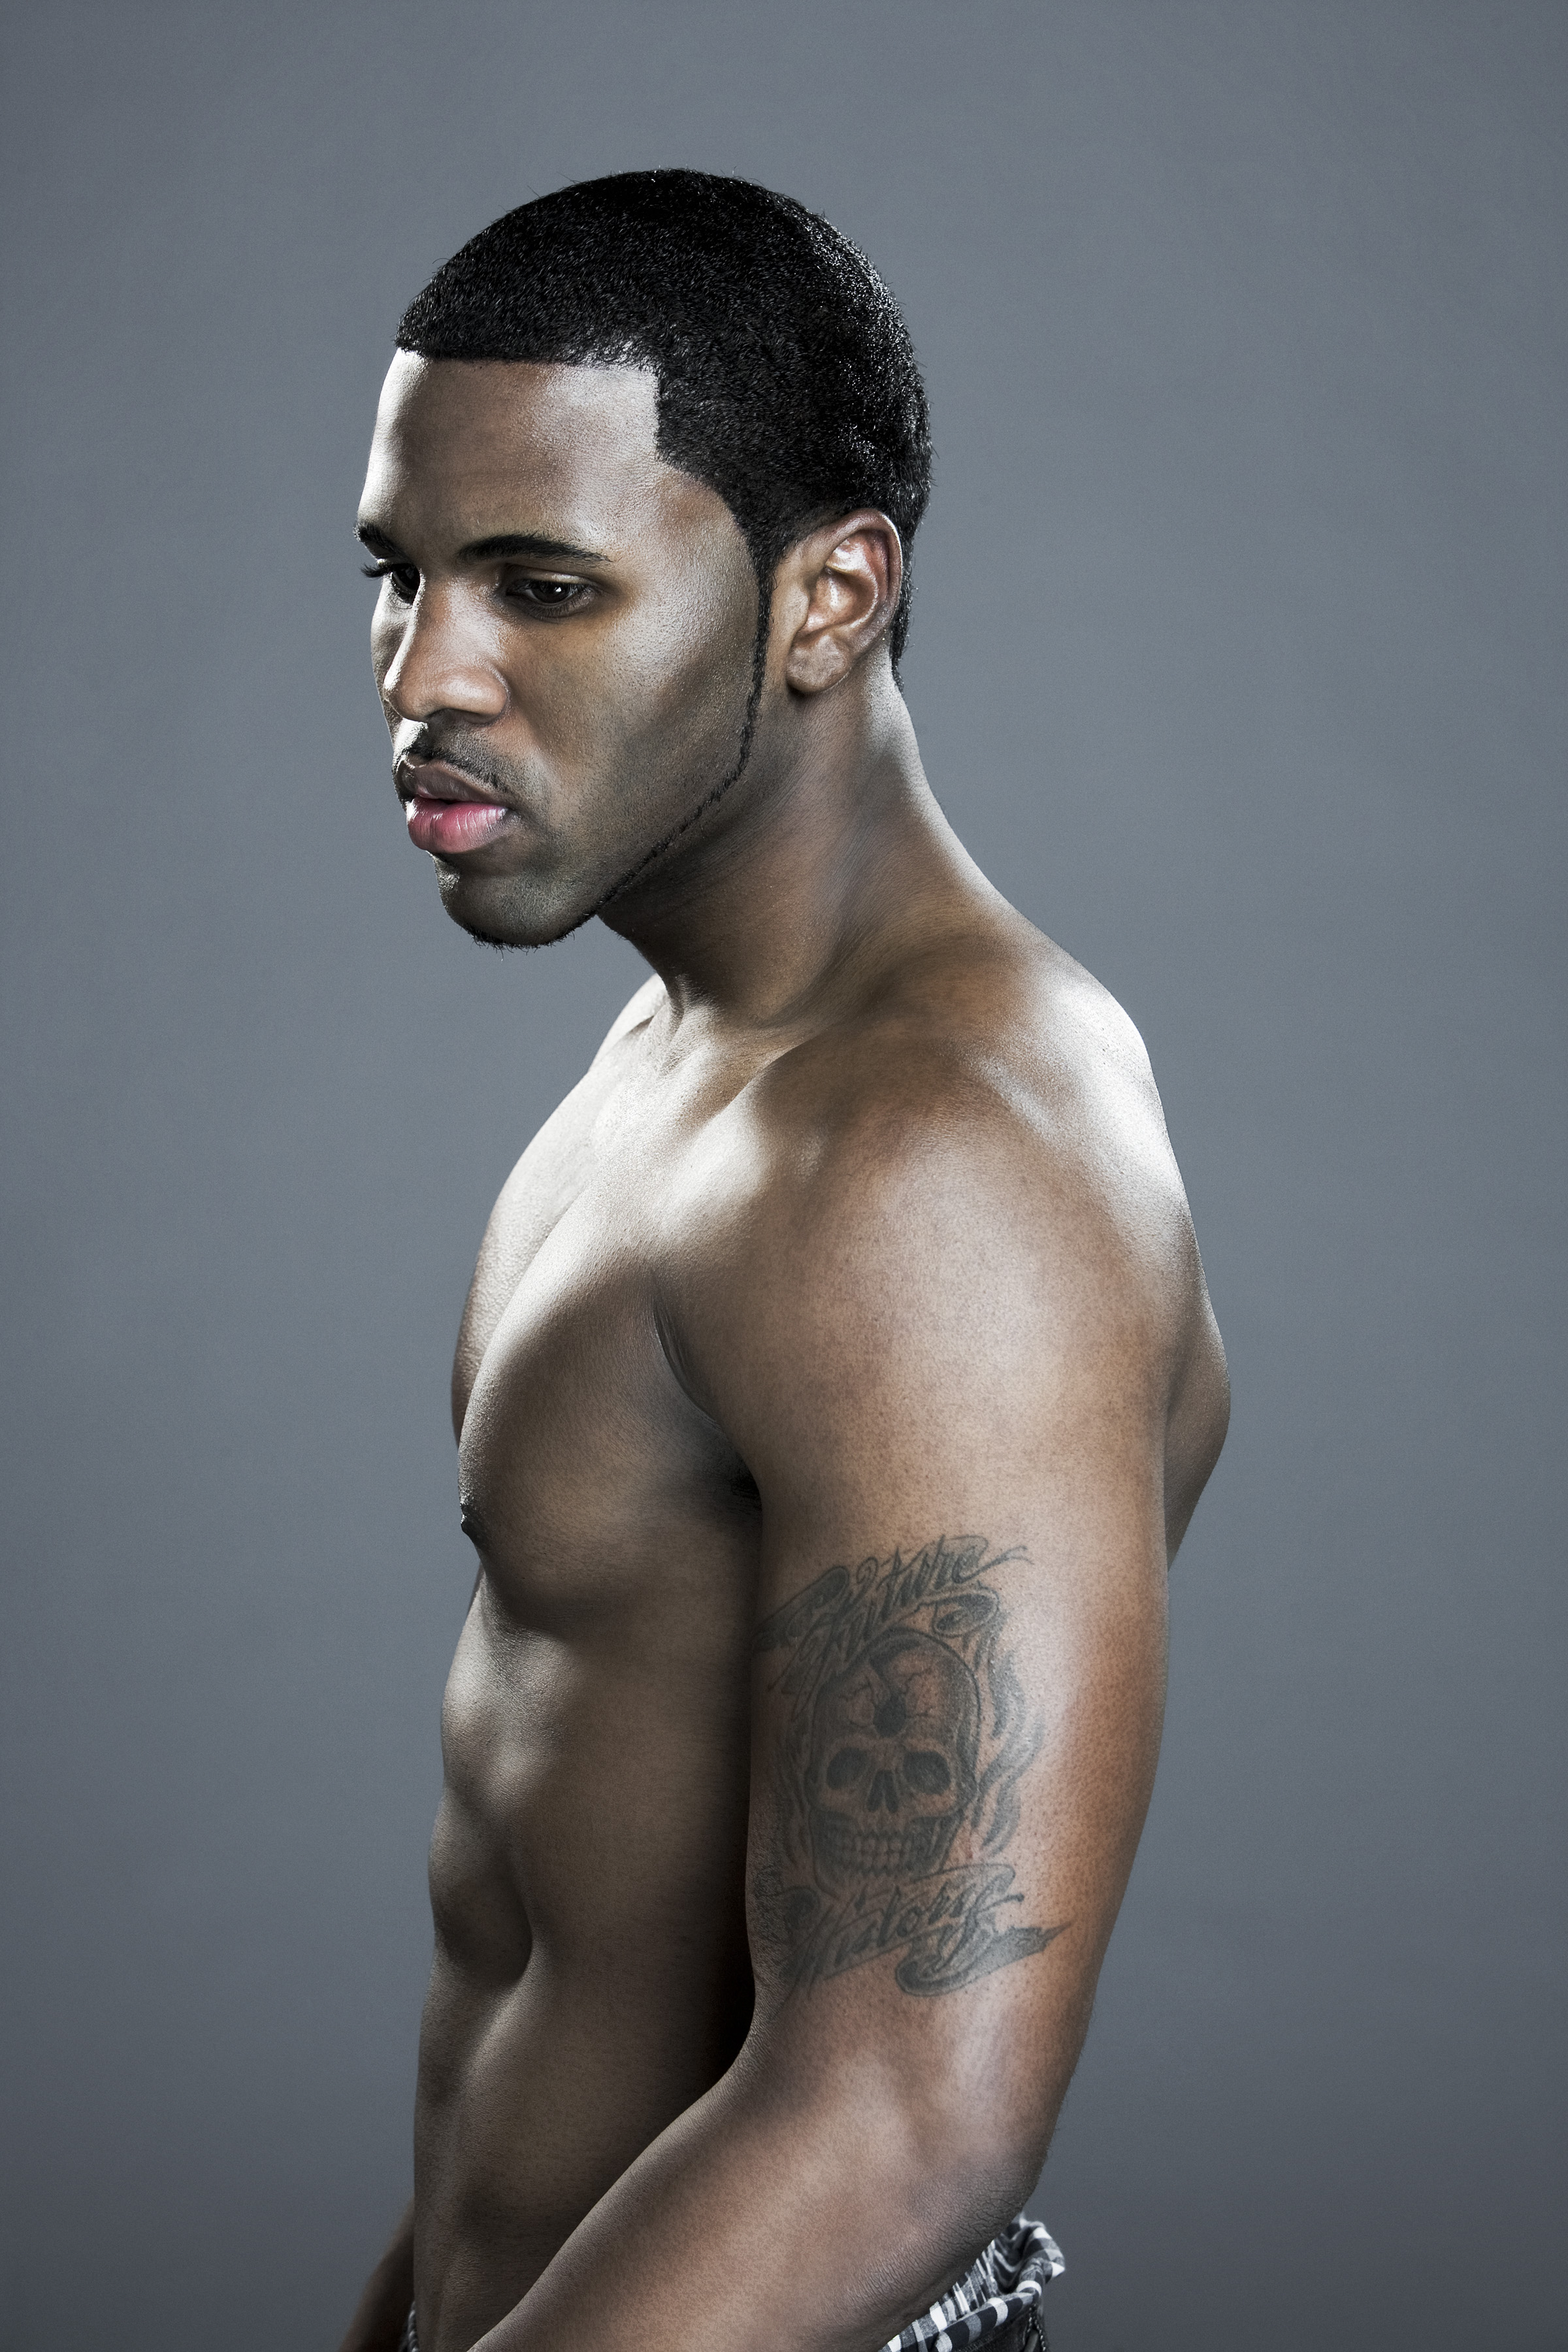 Jason Derulo Performs On 'Dancing With The Stars' (A MustSee) That